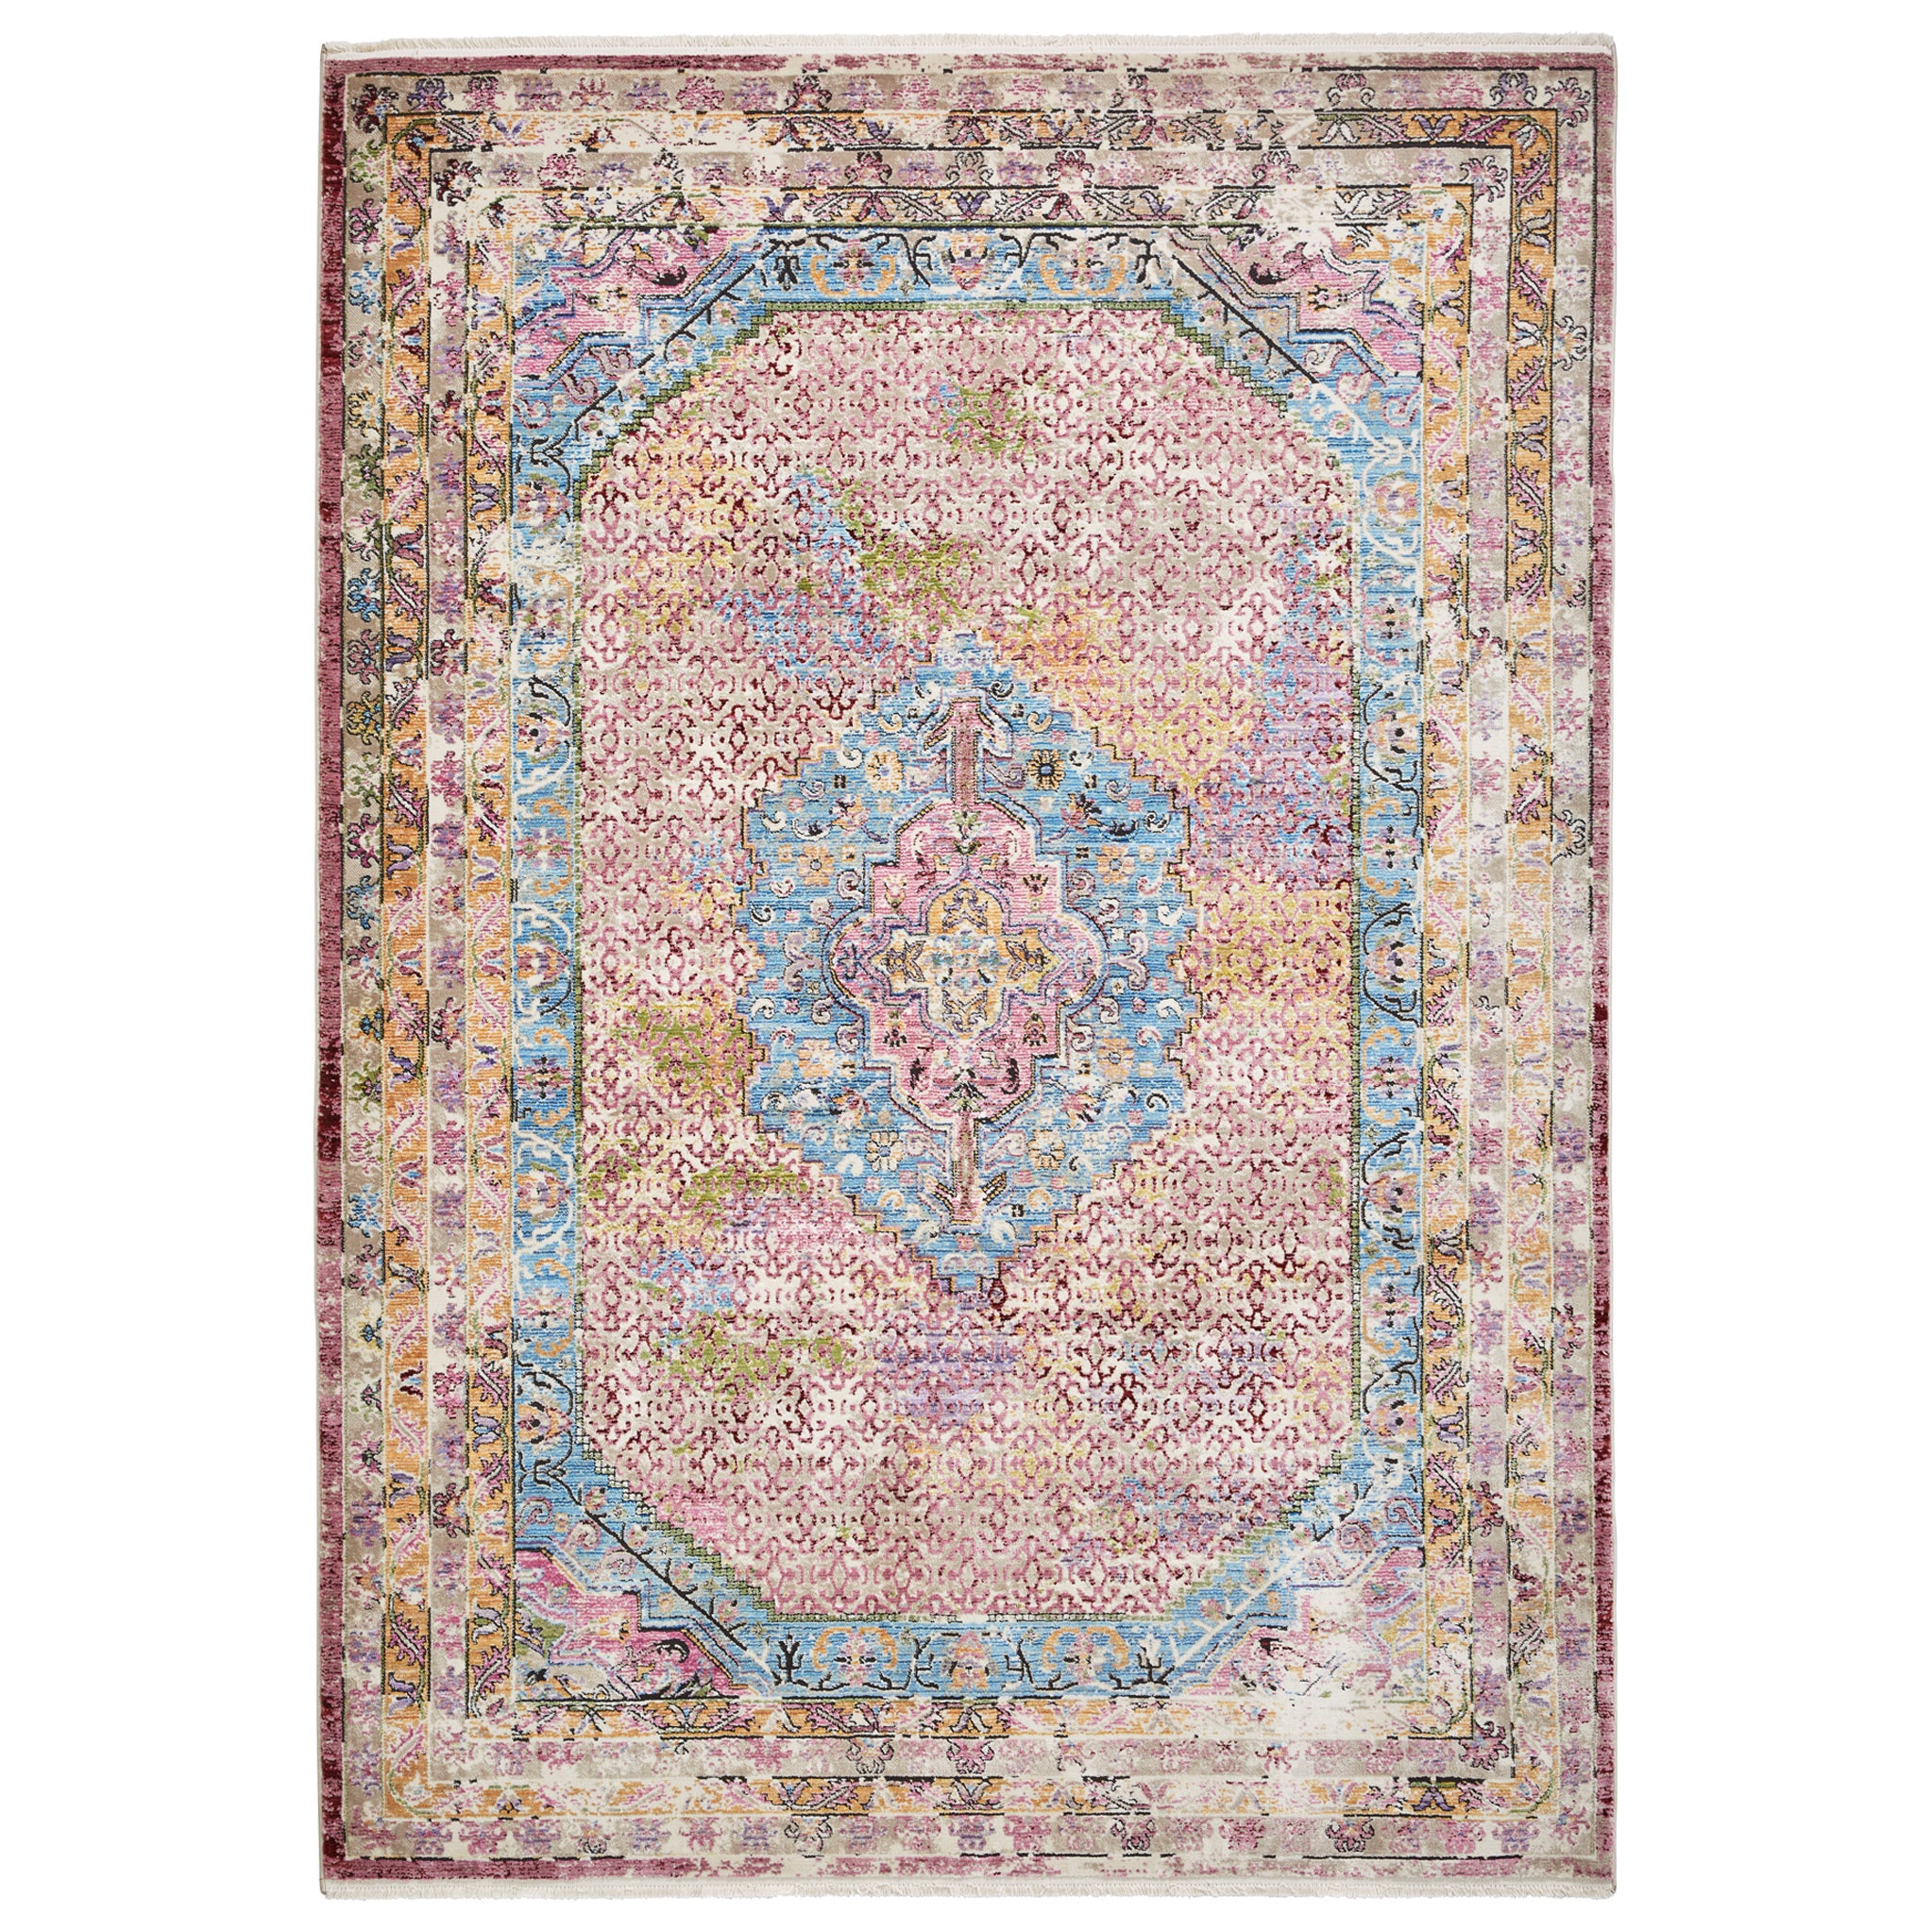 Thea Moroccan Multicoloured Distressed Rectangular Rug For Living Room Or Bedroom